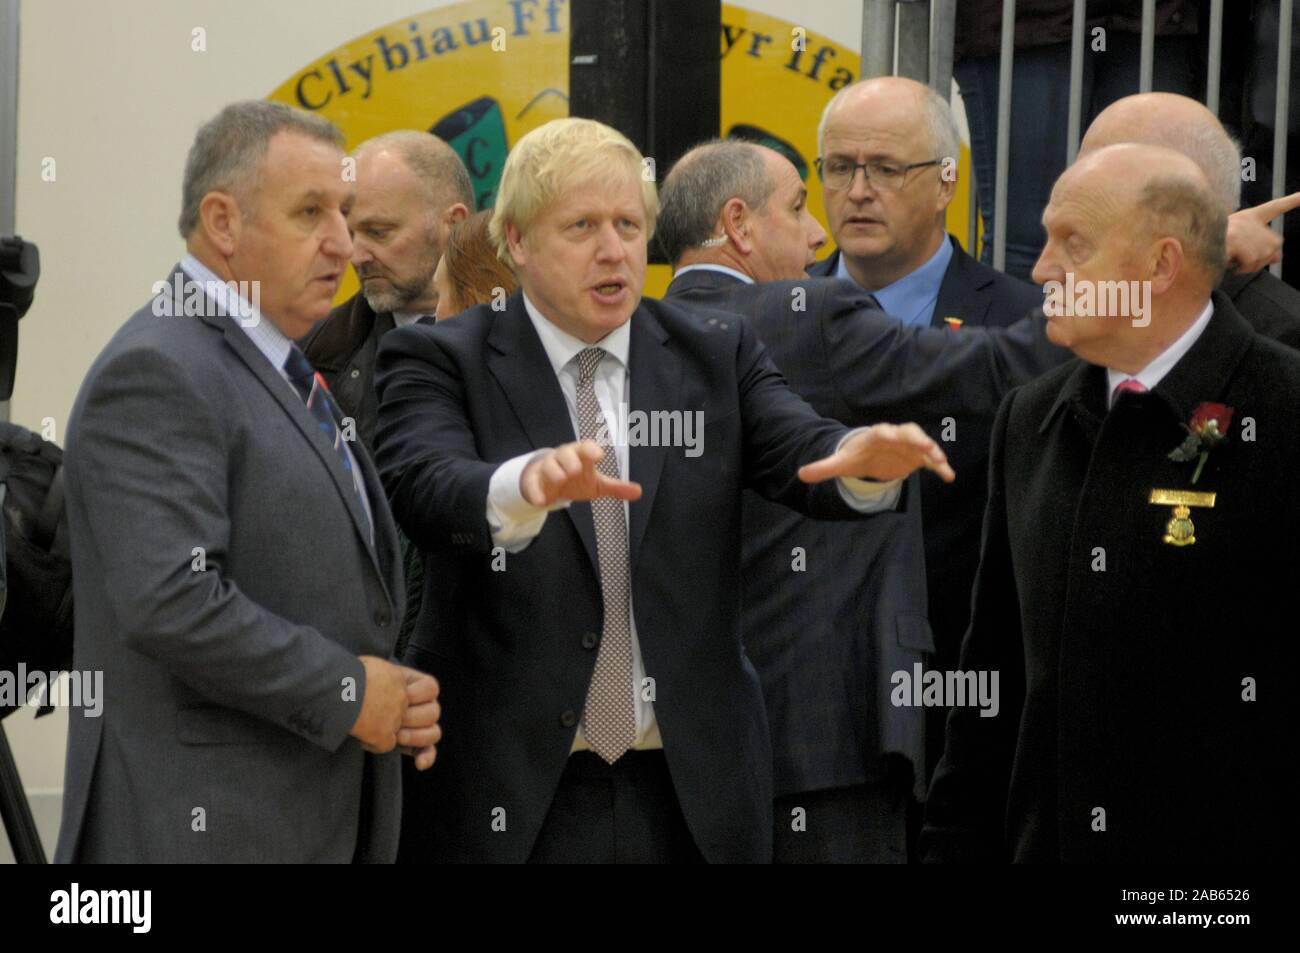 Llanelwedd, Builth Wells, Powys, UK,  25th November 2019. Prime Minister Boris Johnson arrives in the cattle ring during a visit. Credit: Barry Bullough/Alamy Live News Stock Photo